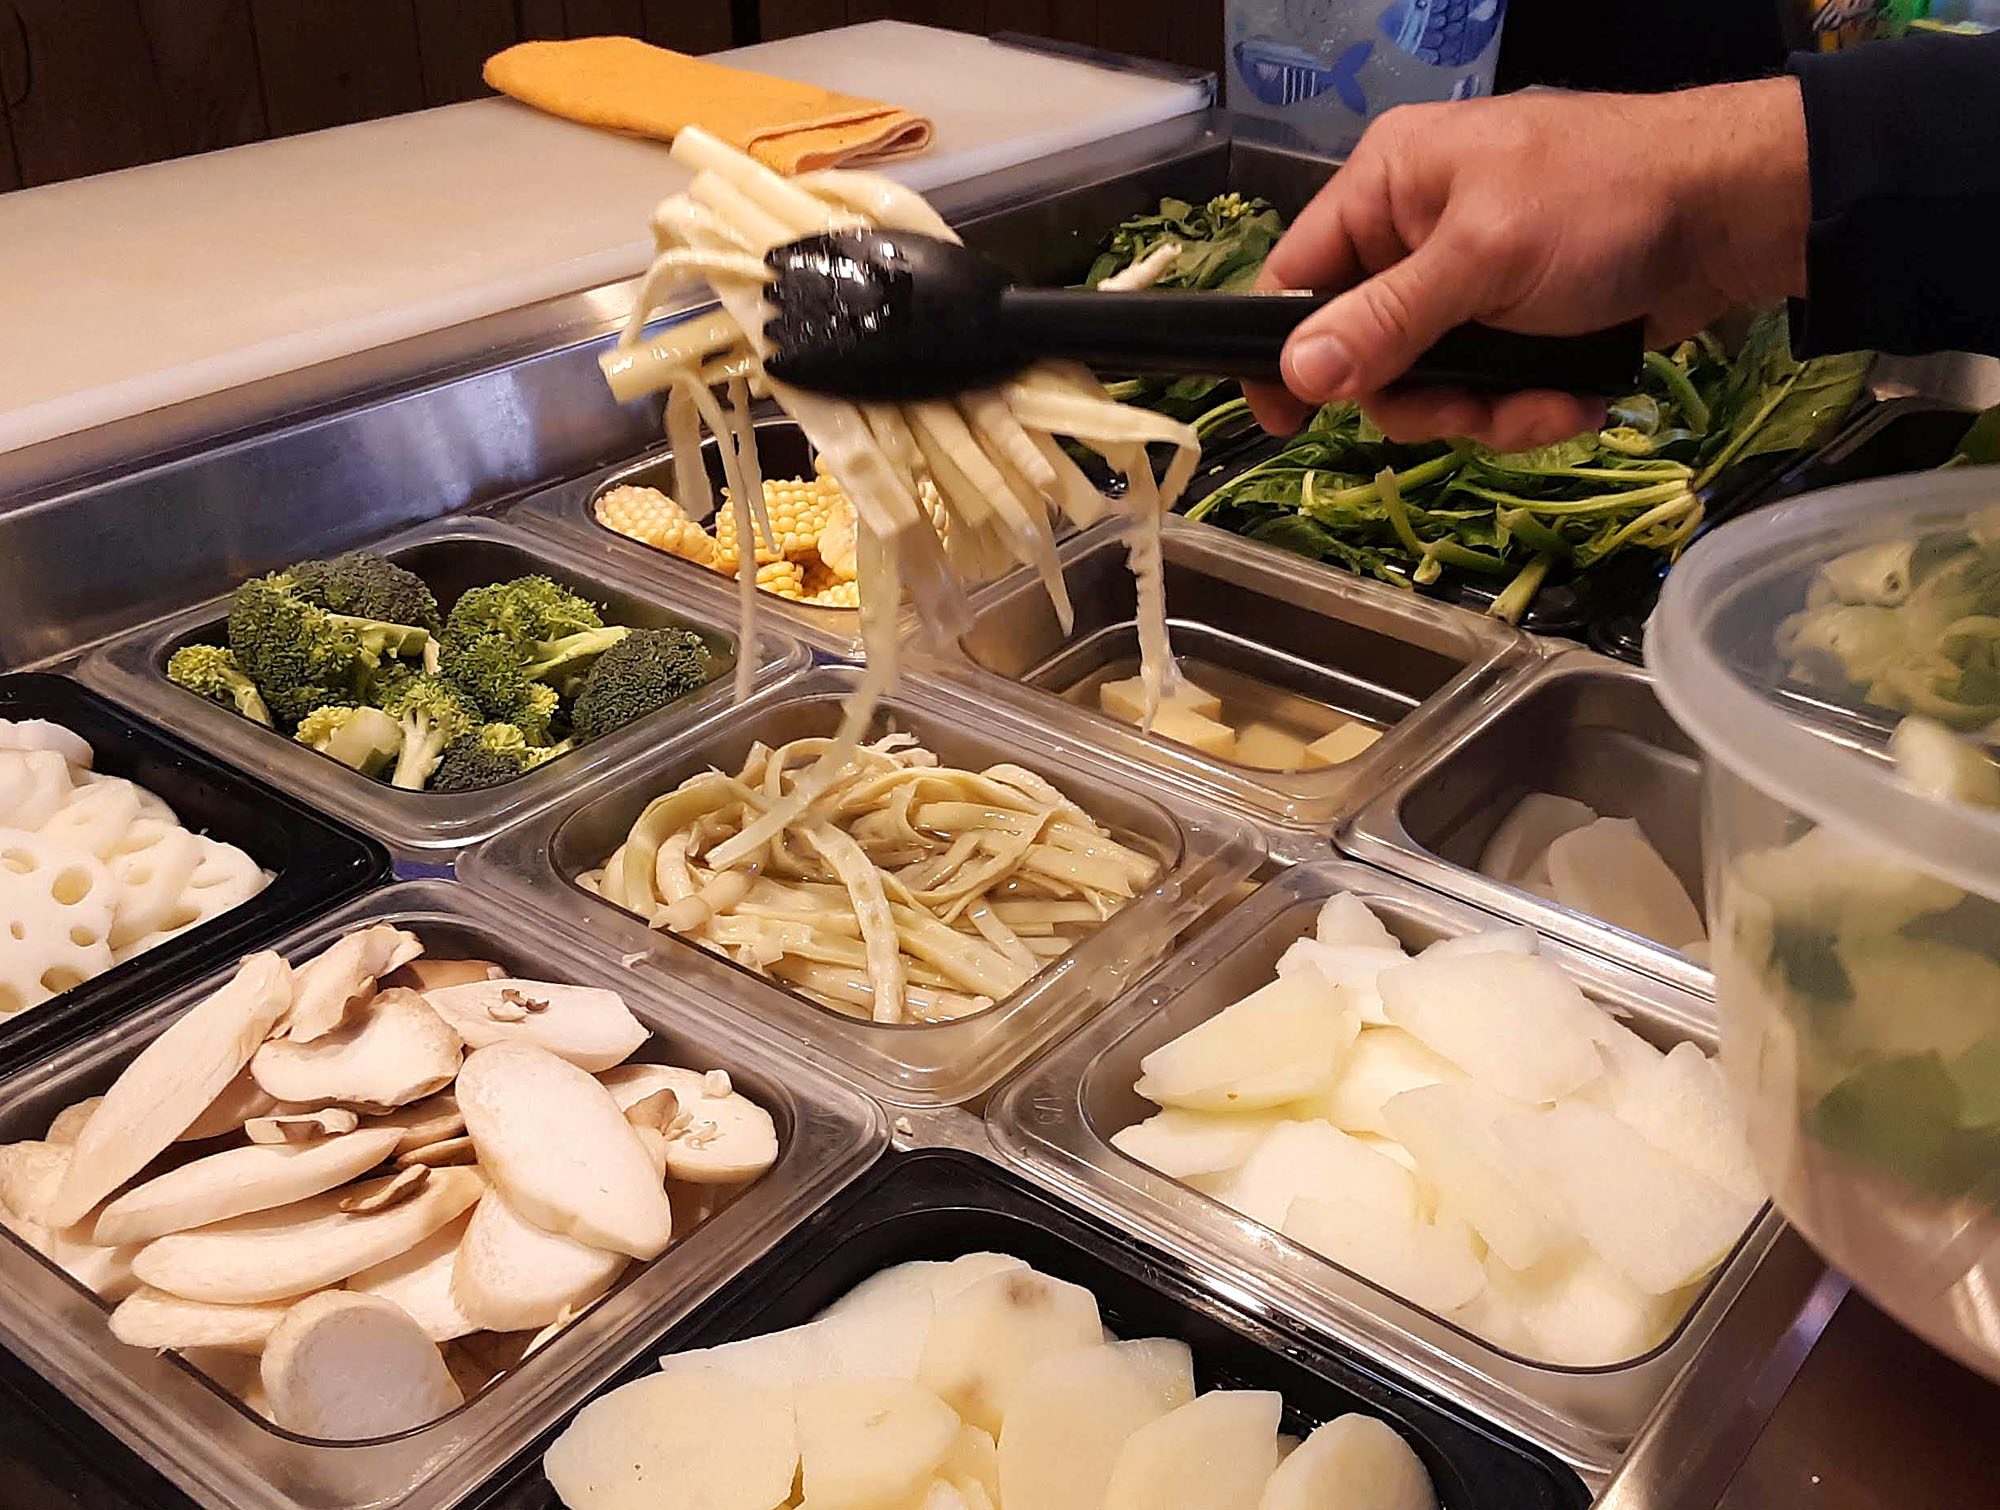 Full metal containers at Spicy Tang allow diners to choose vegetables to add. Photo by Paul Young.